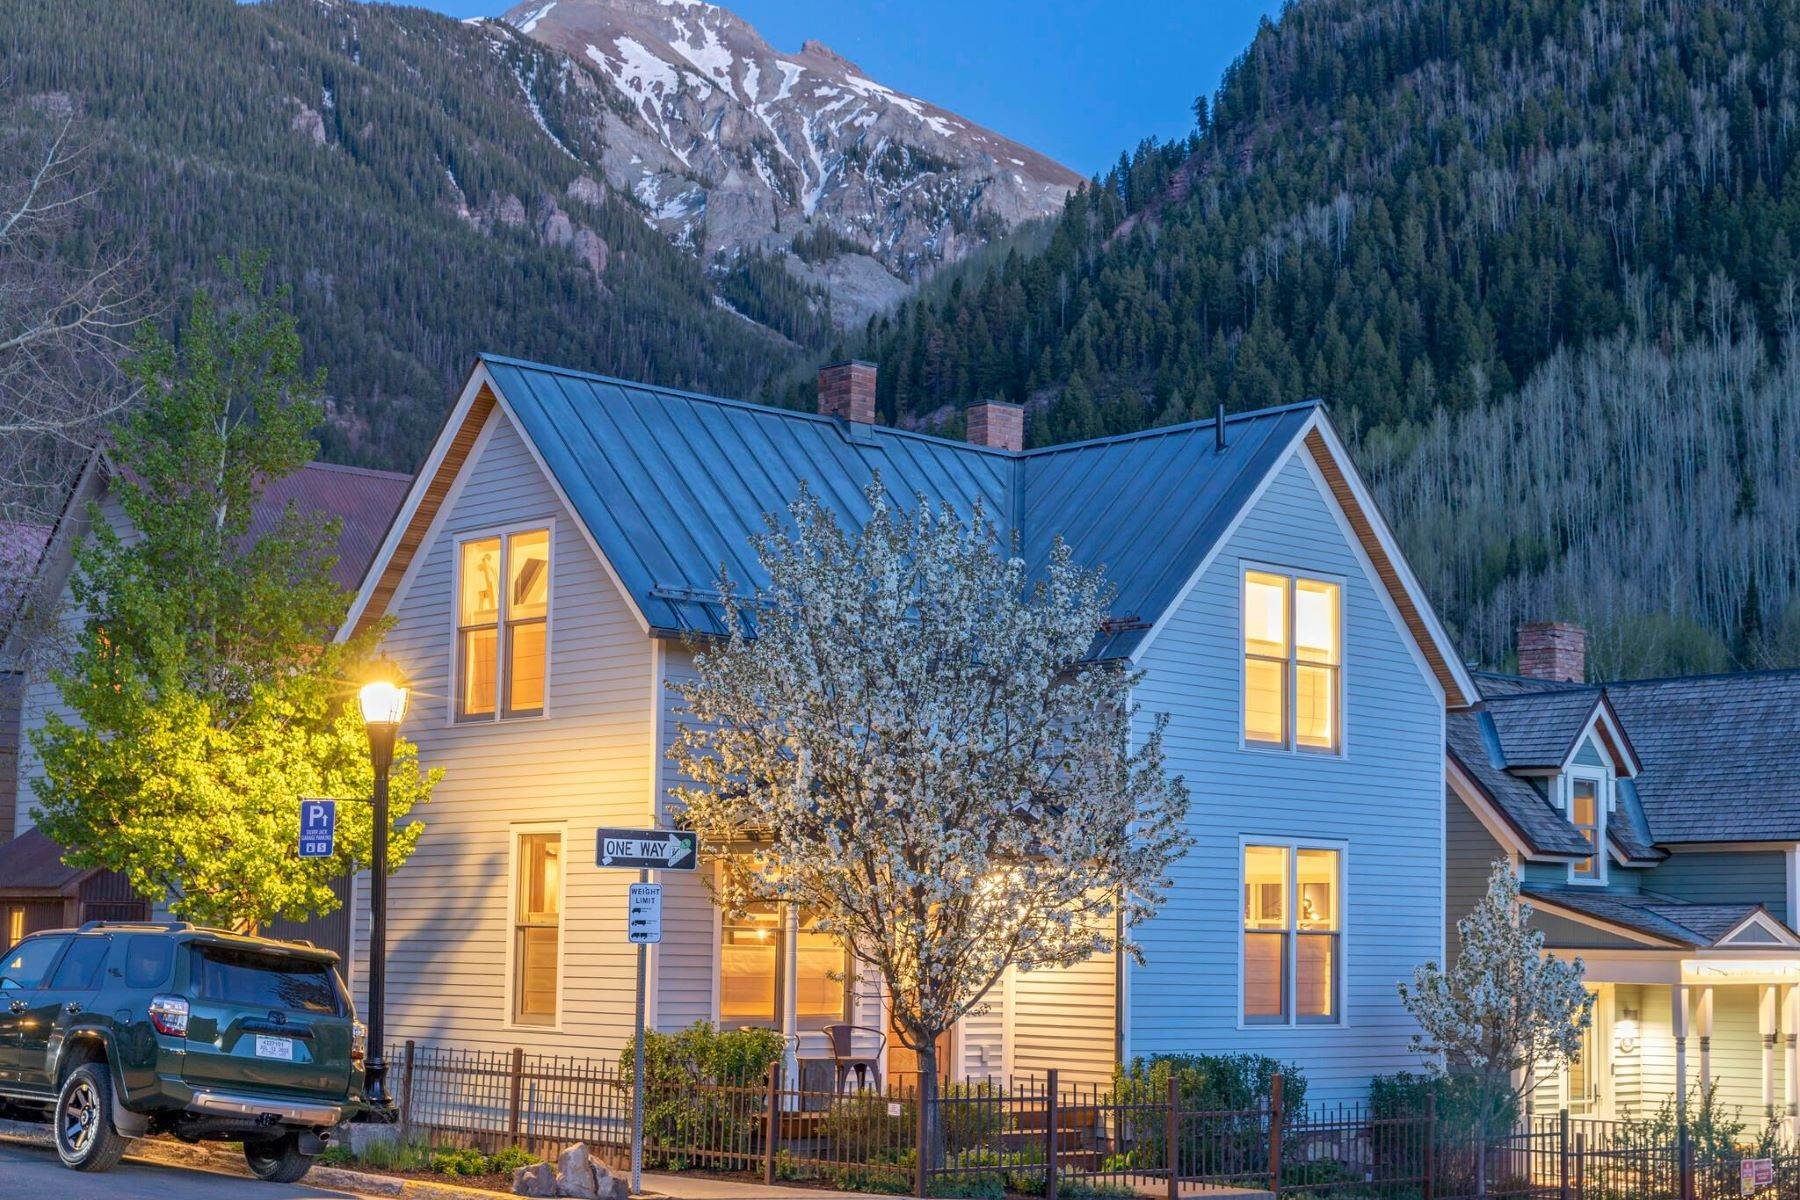 Property for Active at 200 South Oak Street, Telluride, CO 81435 200 South Oak Street Telluride, Colorado 81435 United States